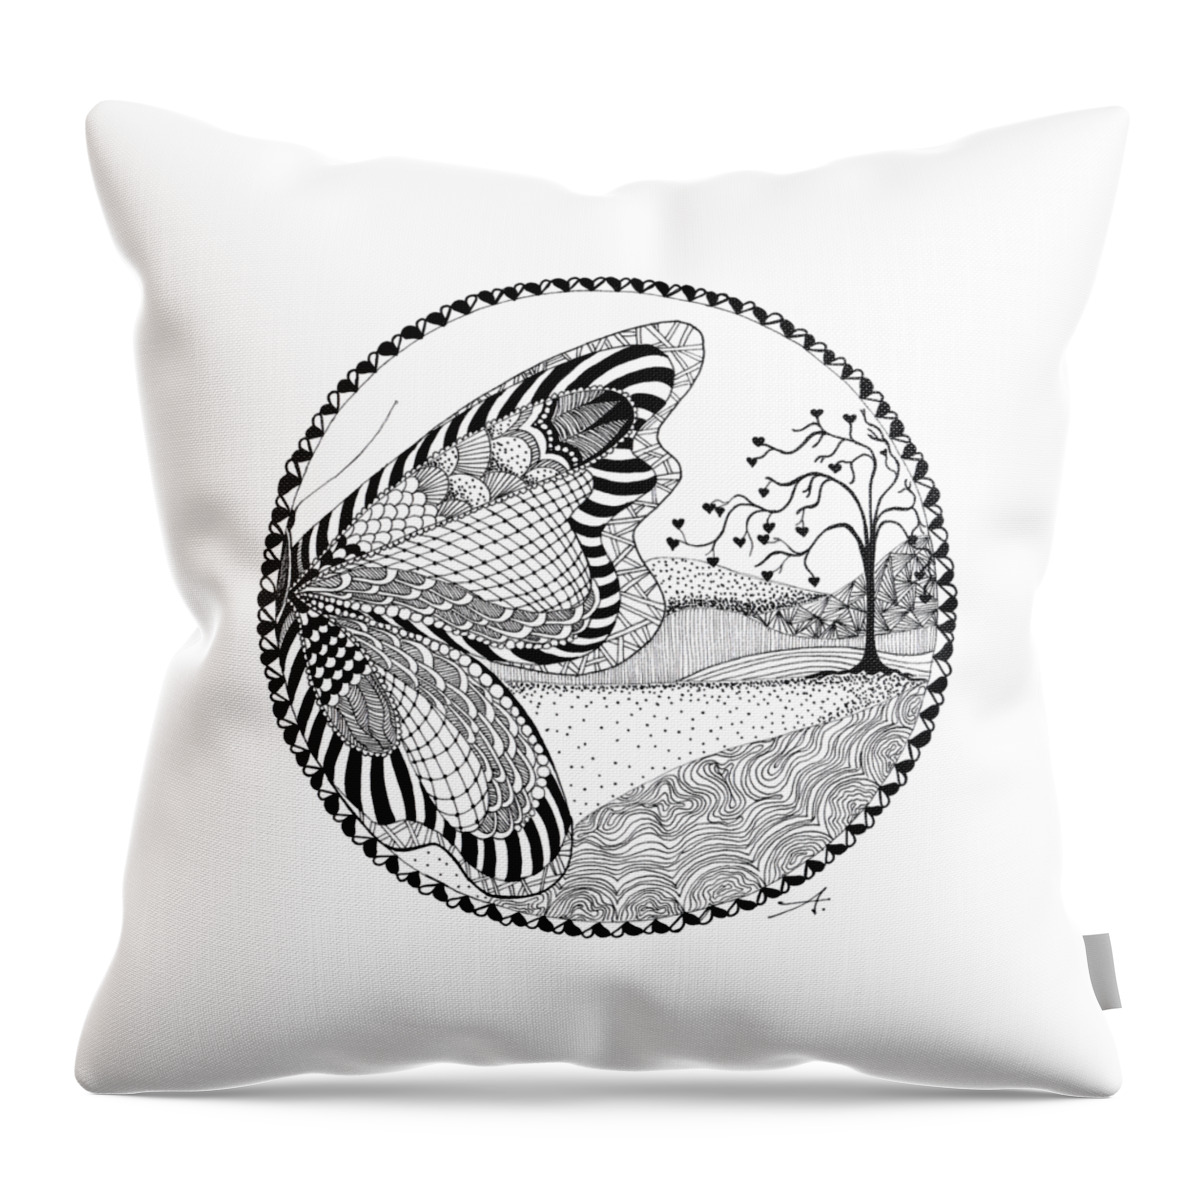 Drawing Throw Pillow featuring the drawing Butterfly Fantasy by Ana V Ramirez